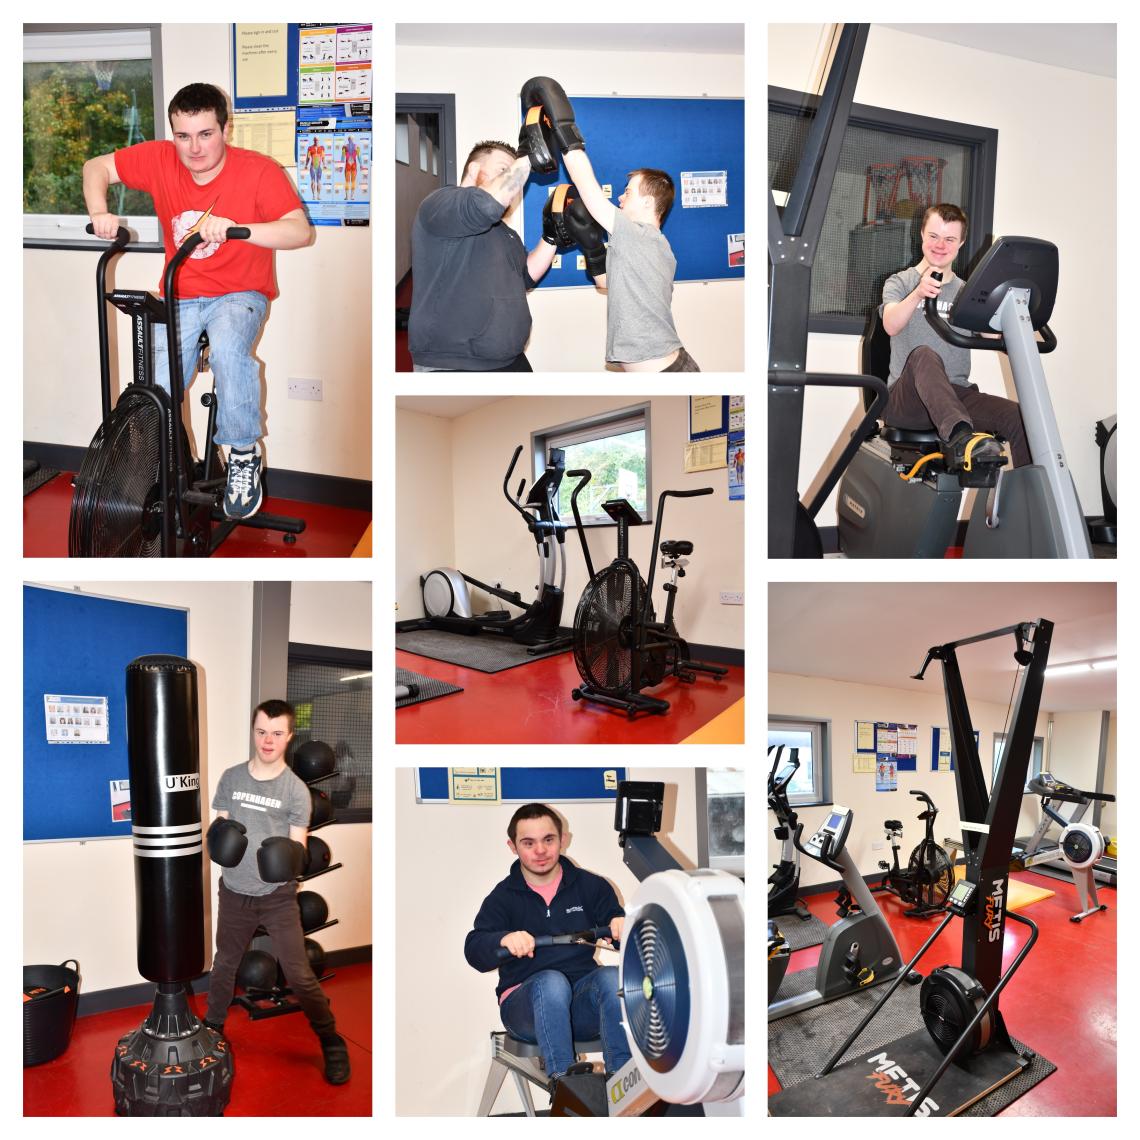 Collage of learners using the gym equipment